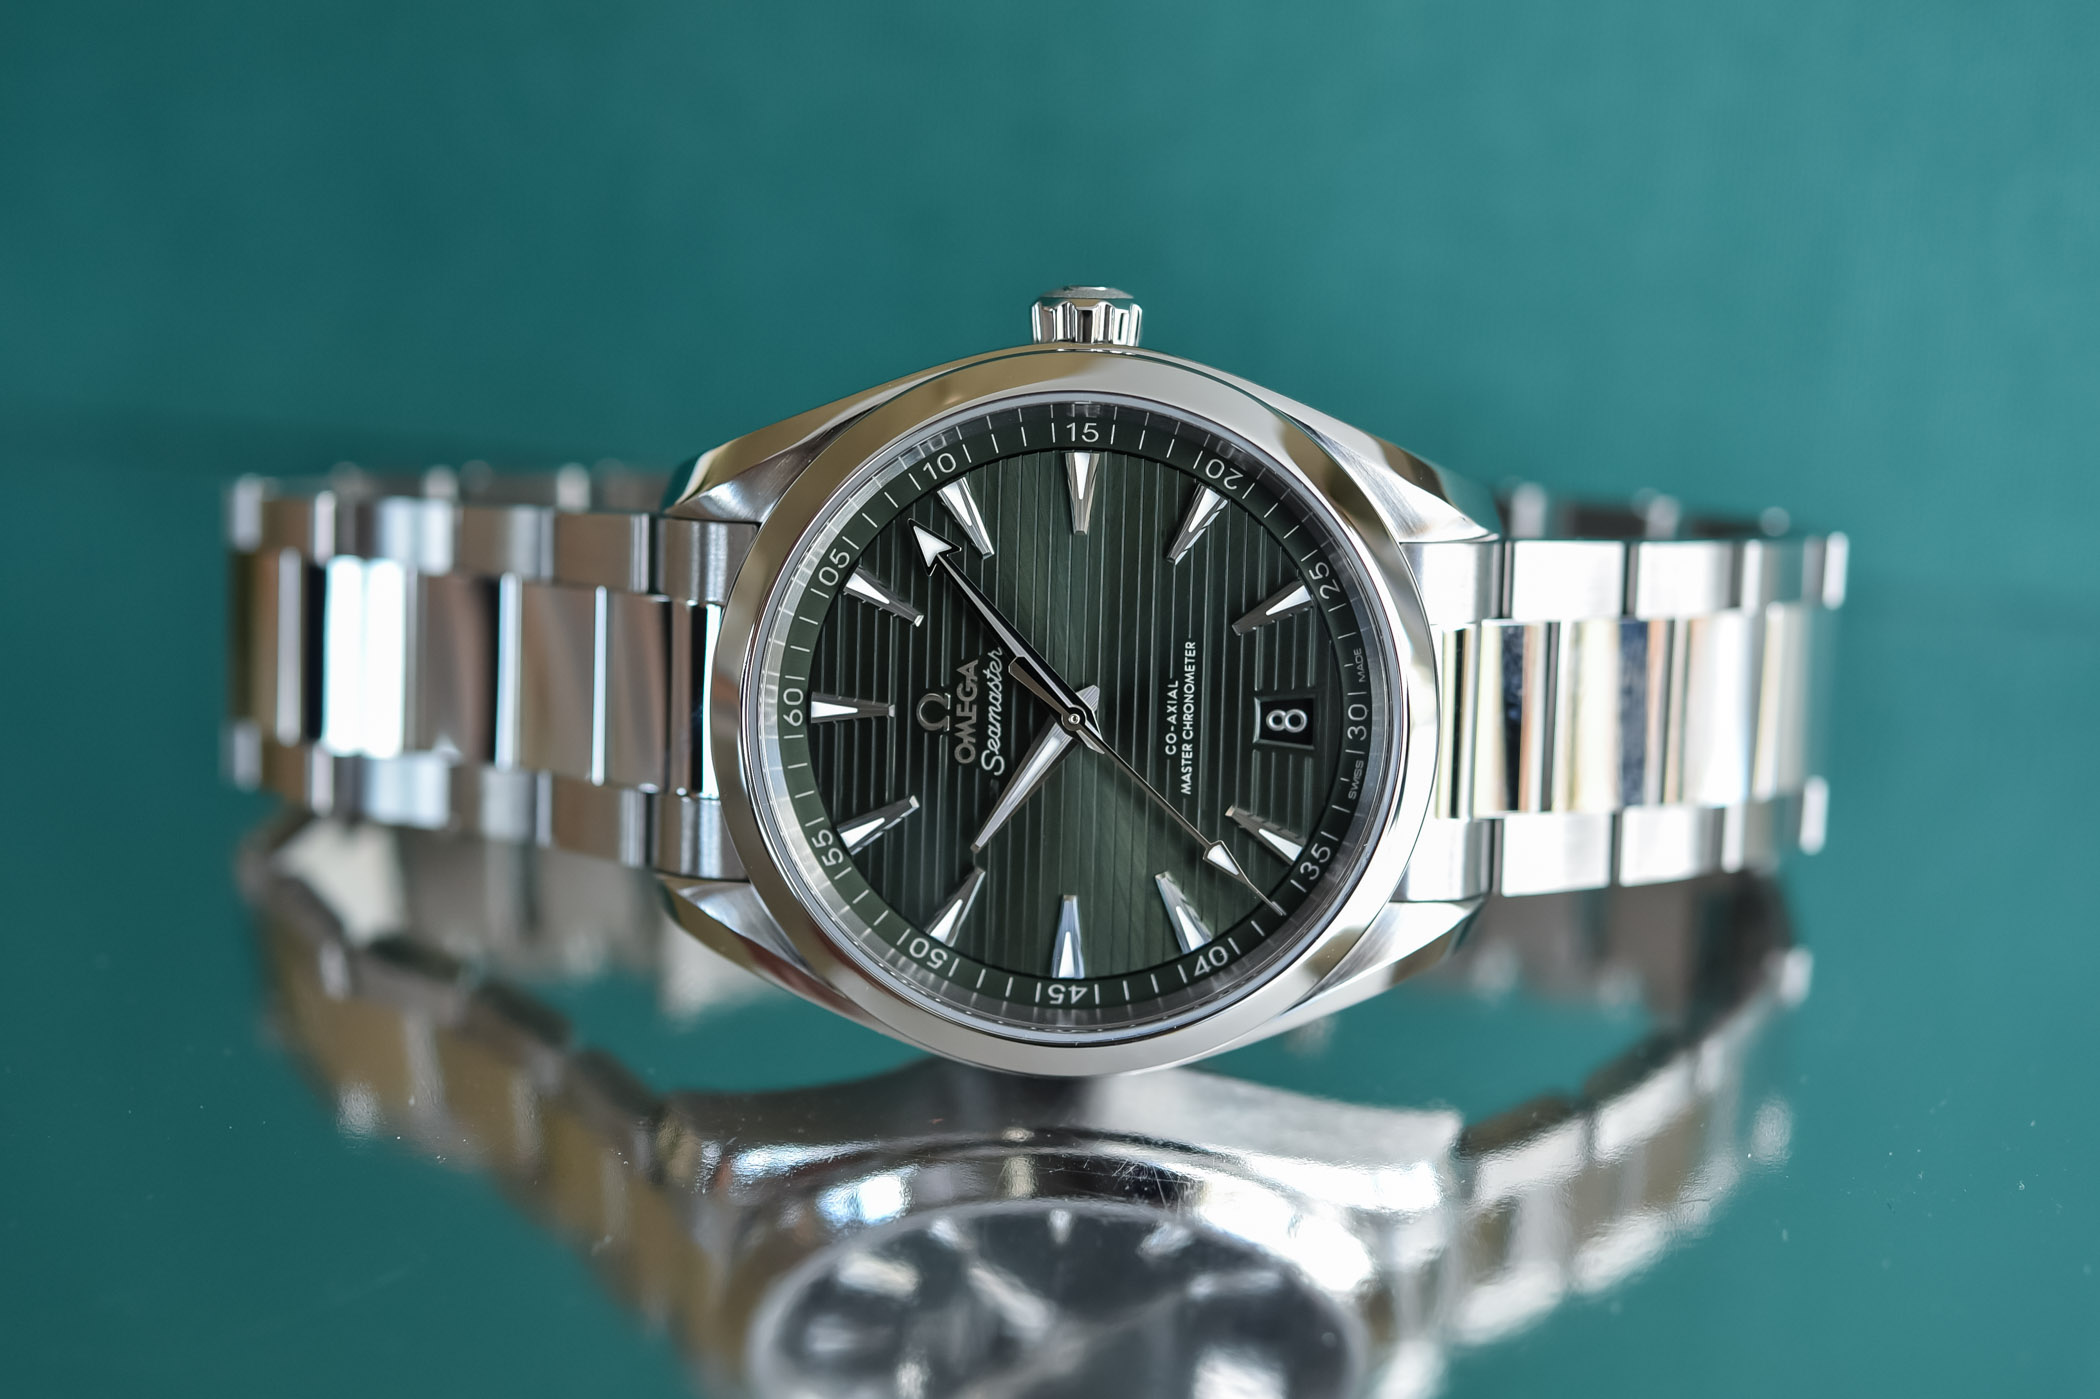 The green dial makes the fake Omega more dynamic.